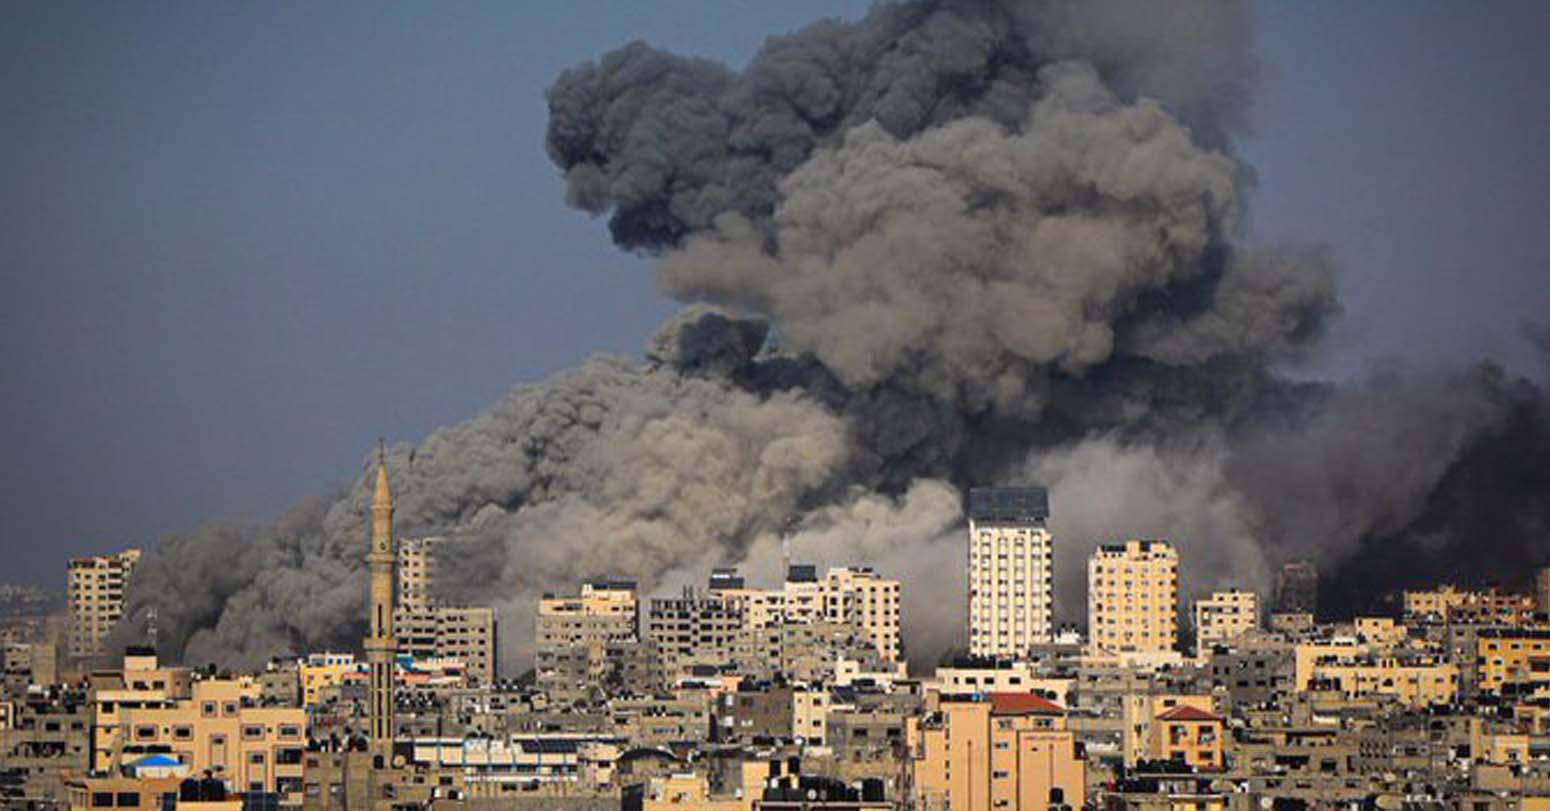 Gaza Fighting Intensifies, US Vetoes Security Council Demand For Ceasefire